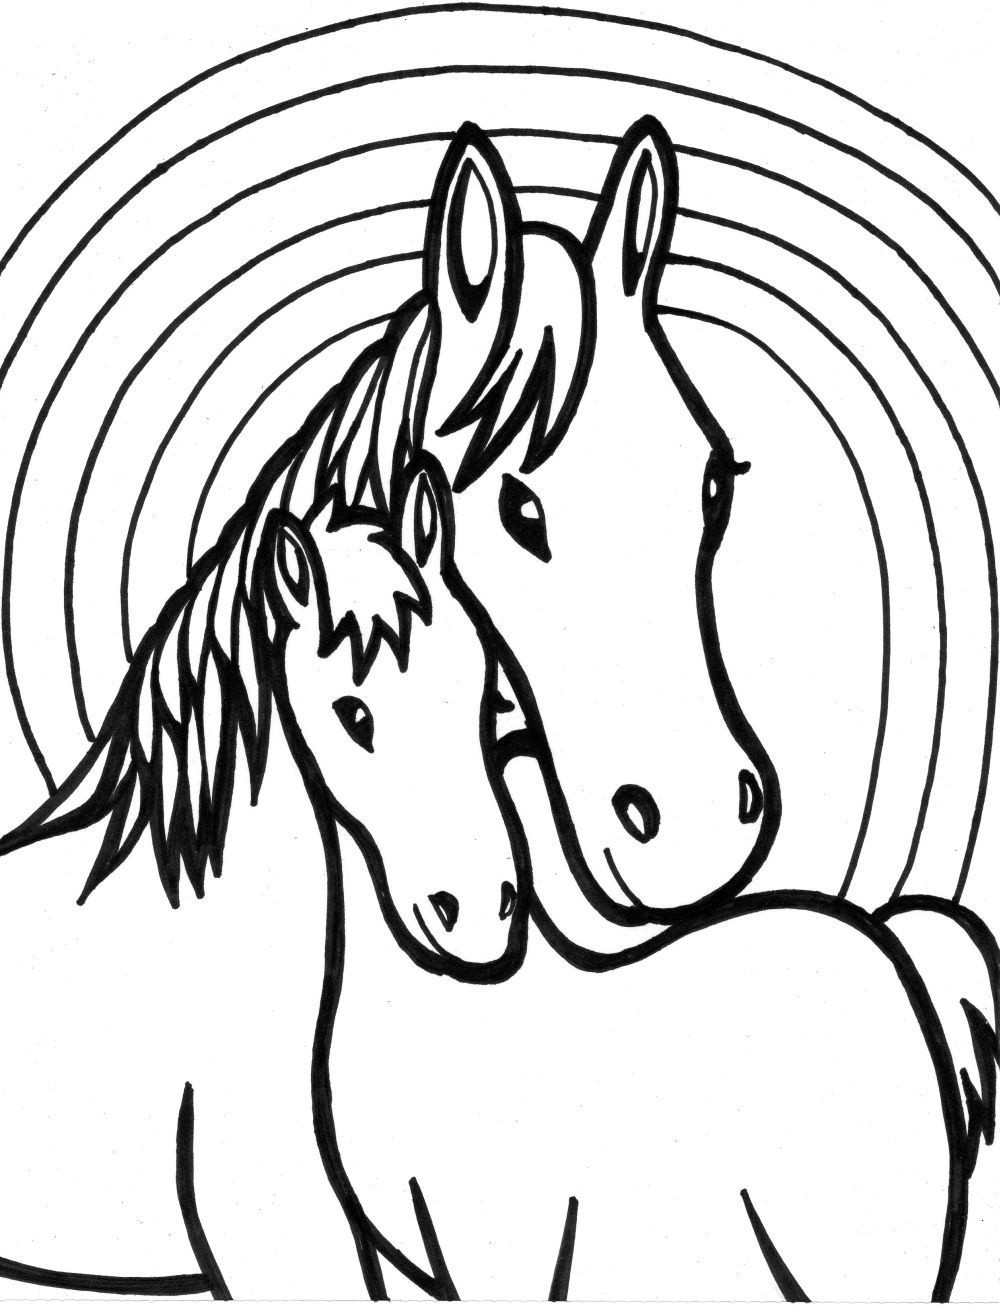 Coloring Pages For Girls (5) Coloring Kids - Coloring Kids